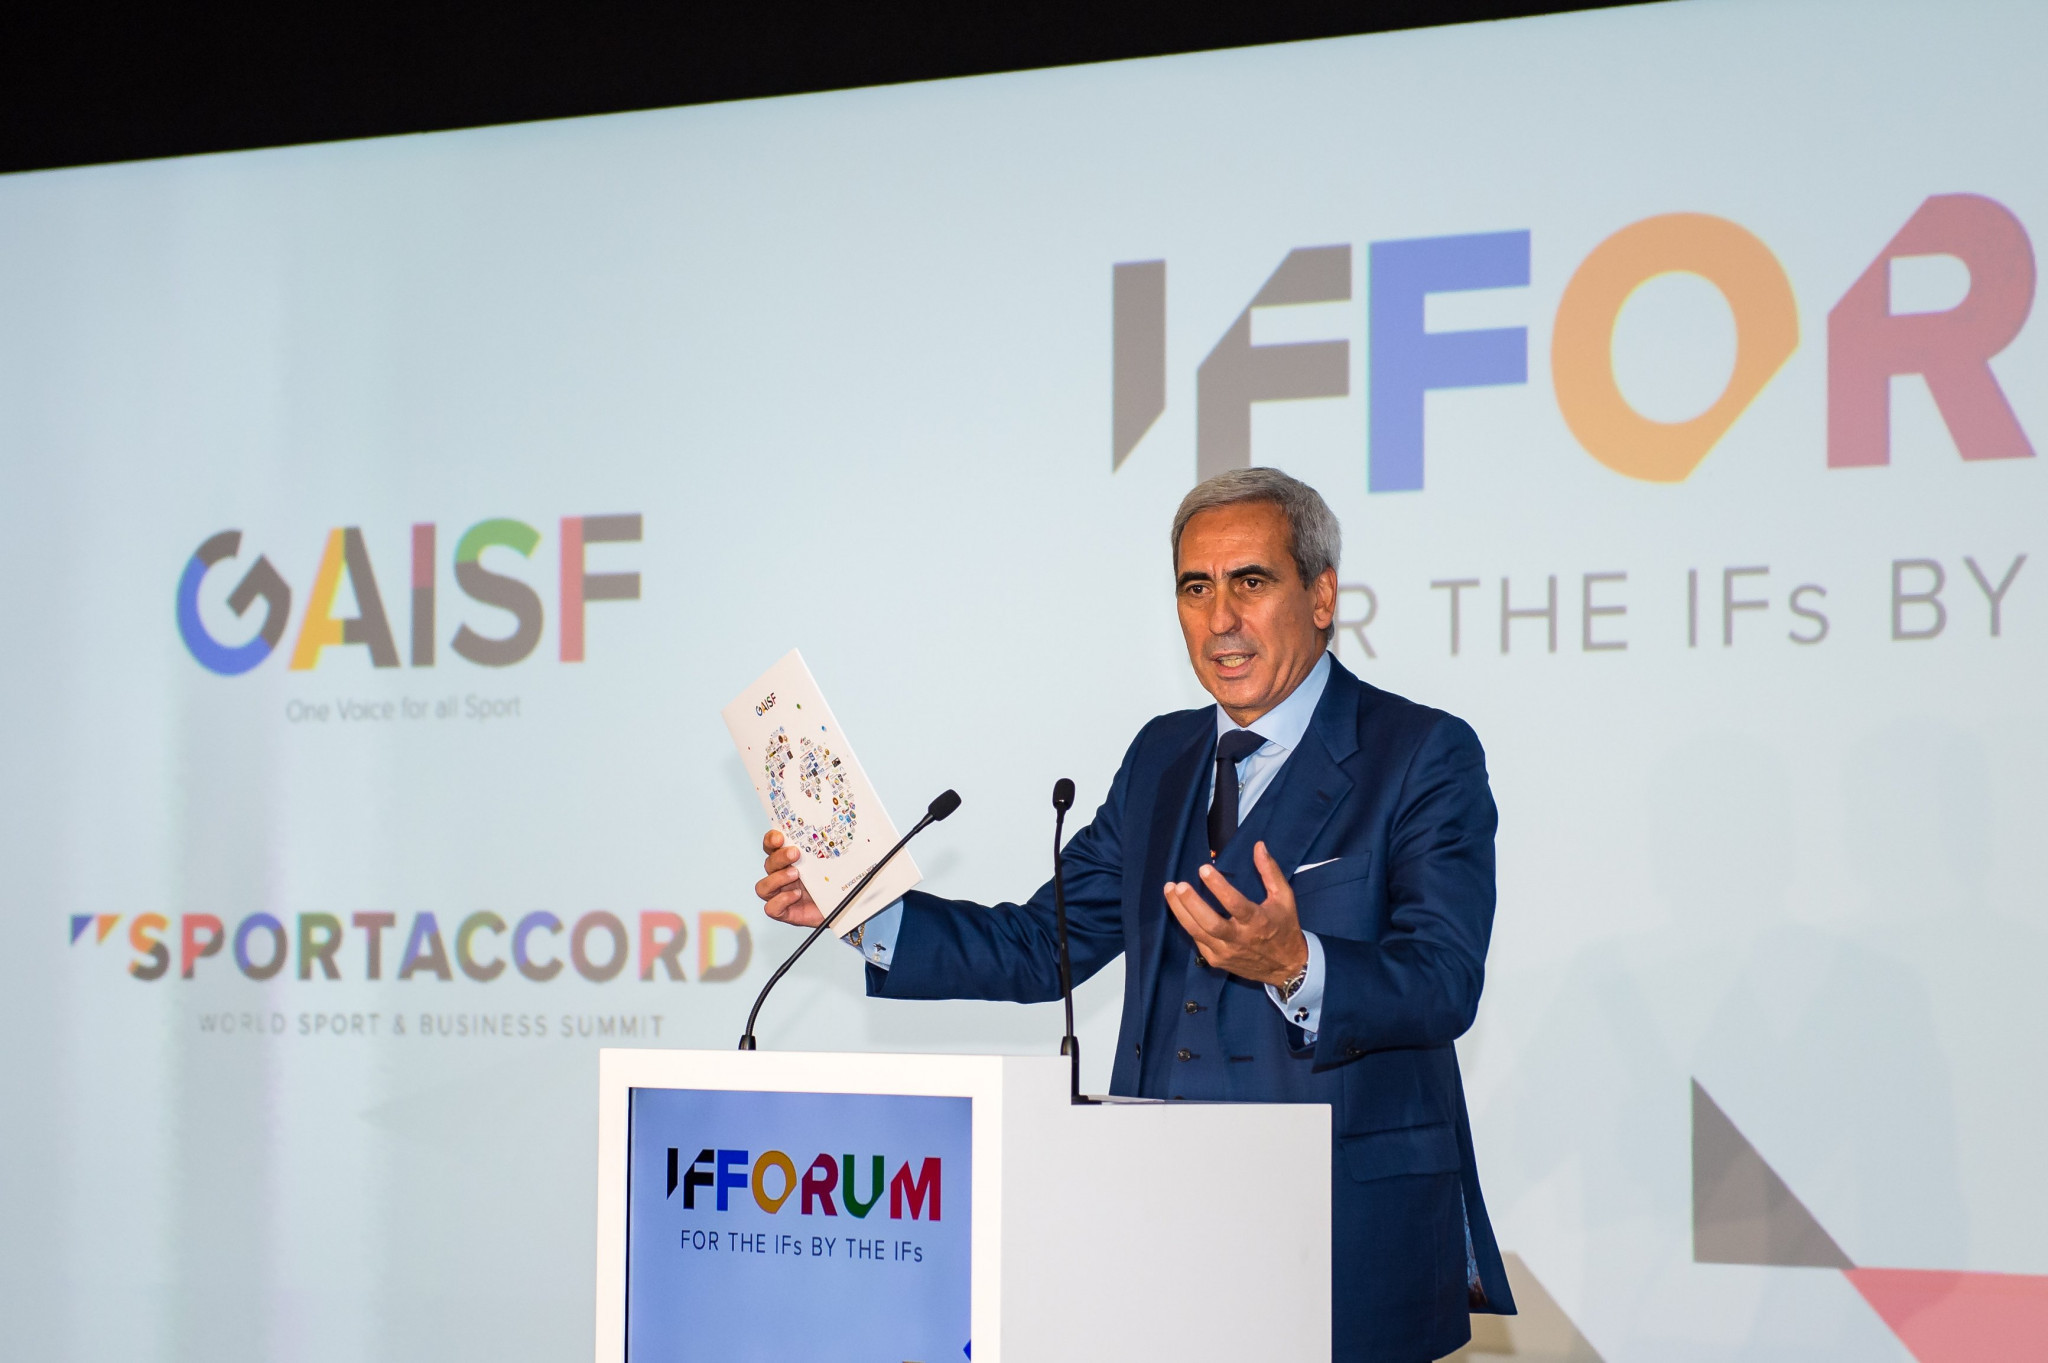 GAISF President Raffaele Chiulli launches busy day at IF Forum